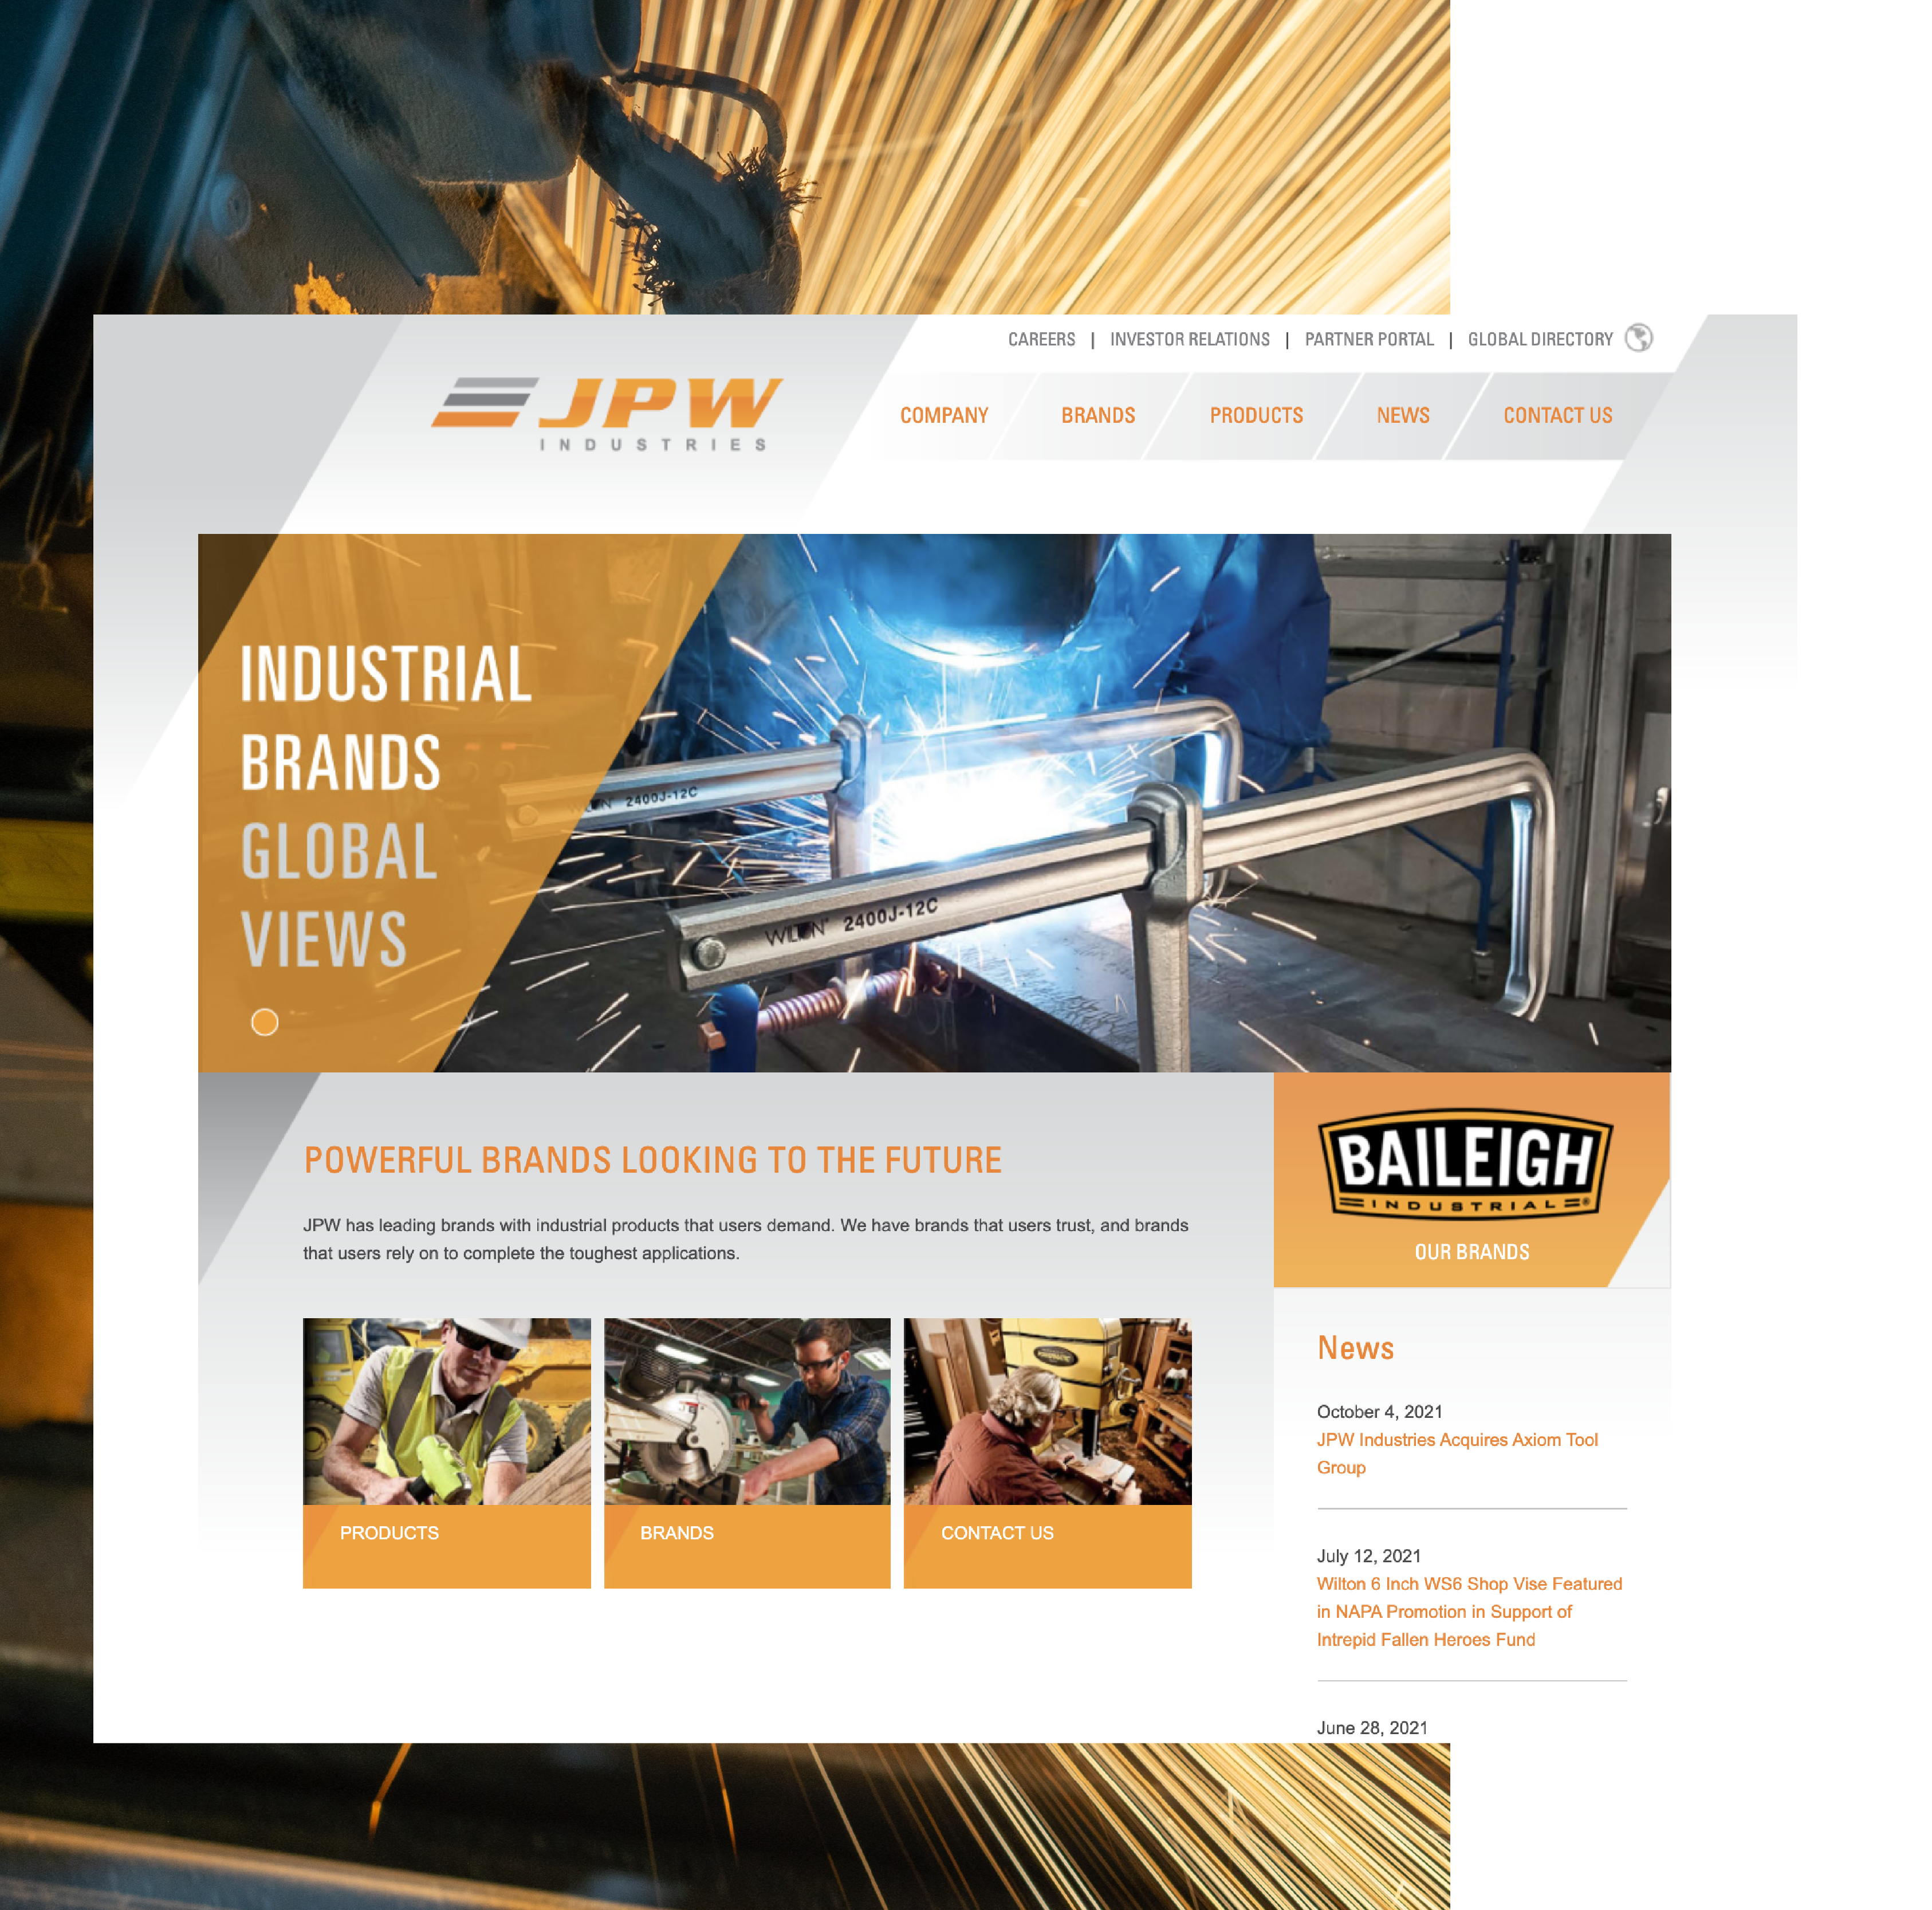 JPW Industries home page